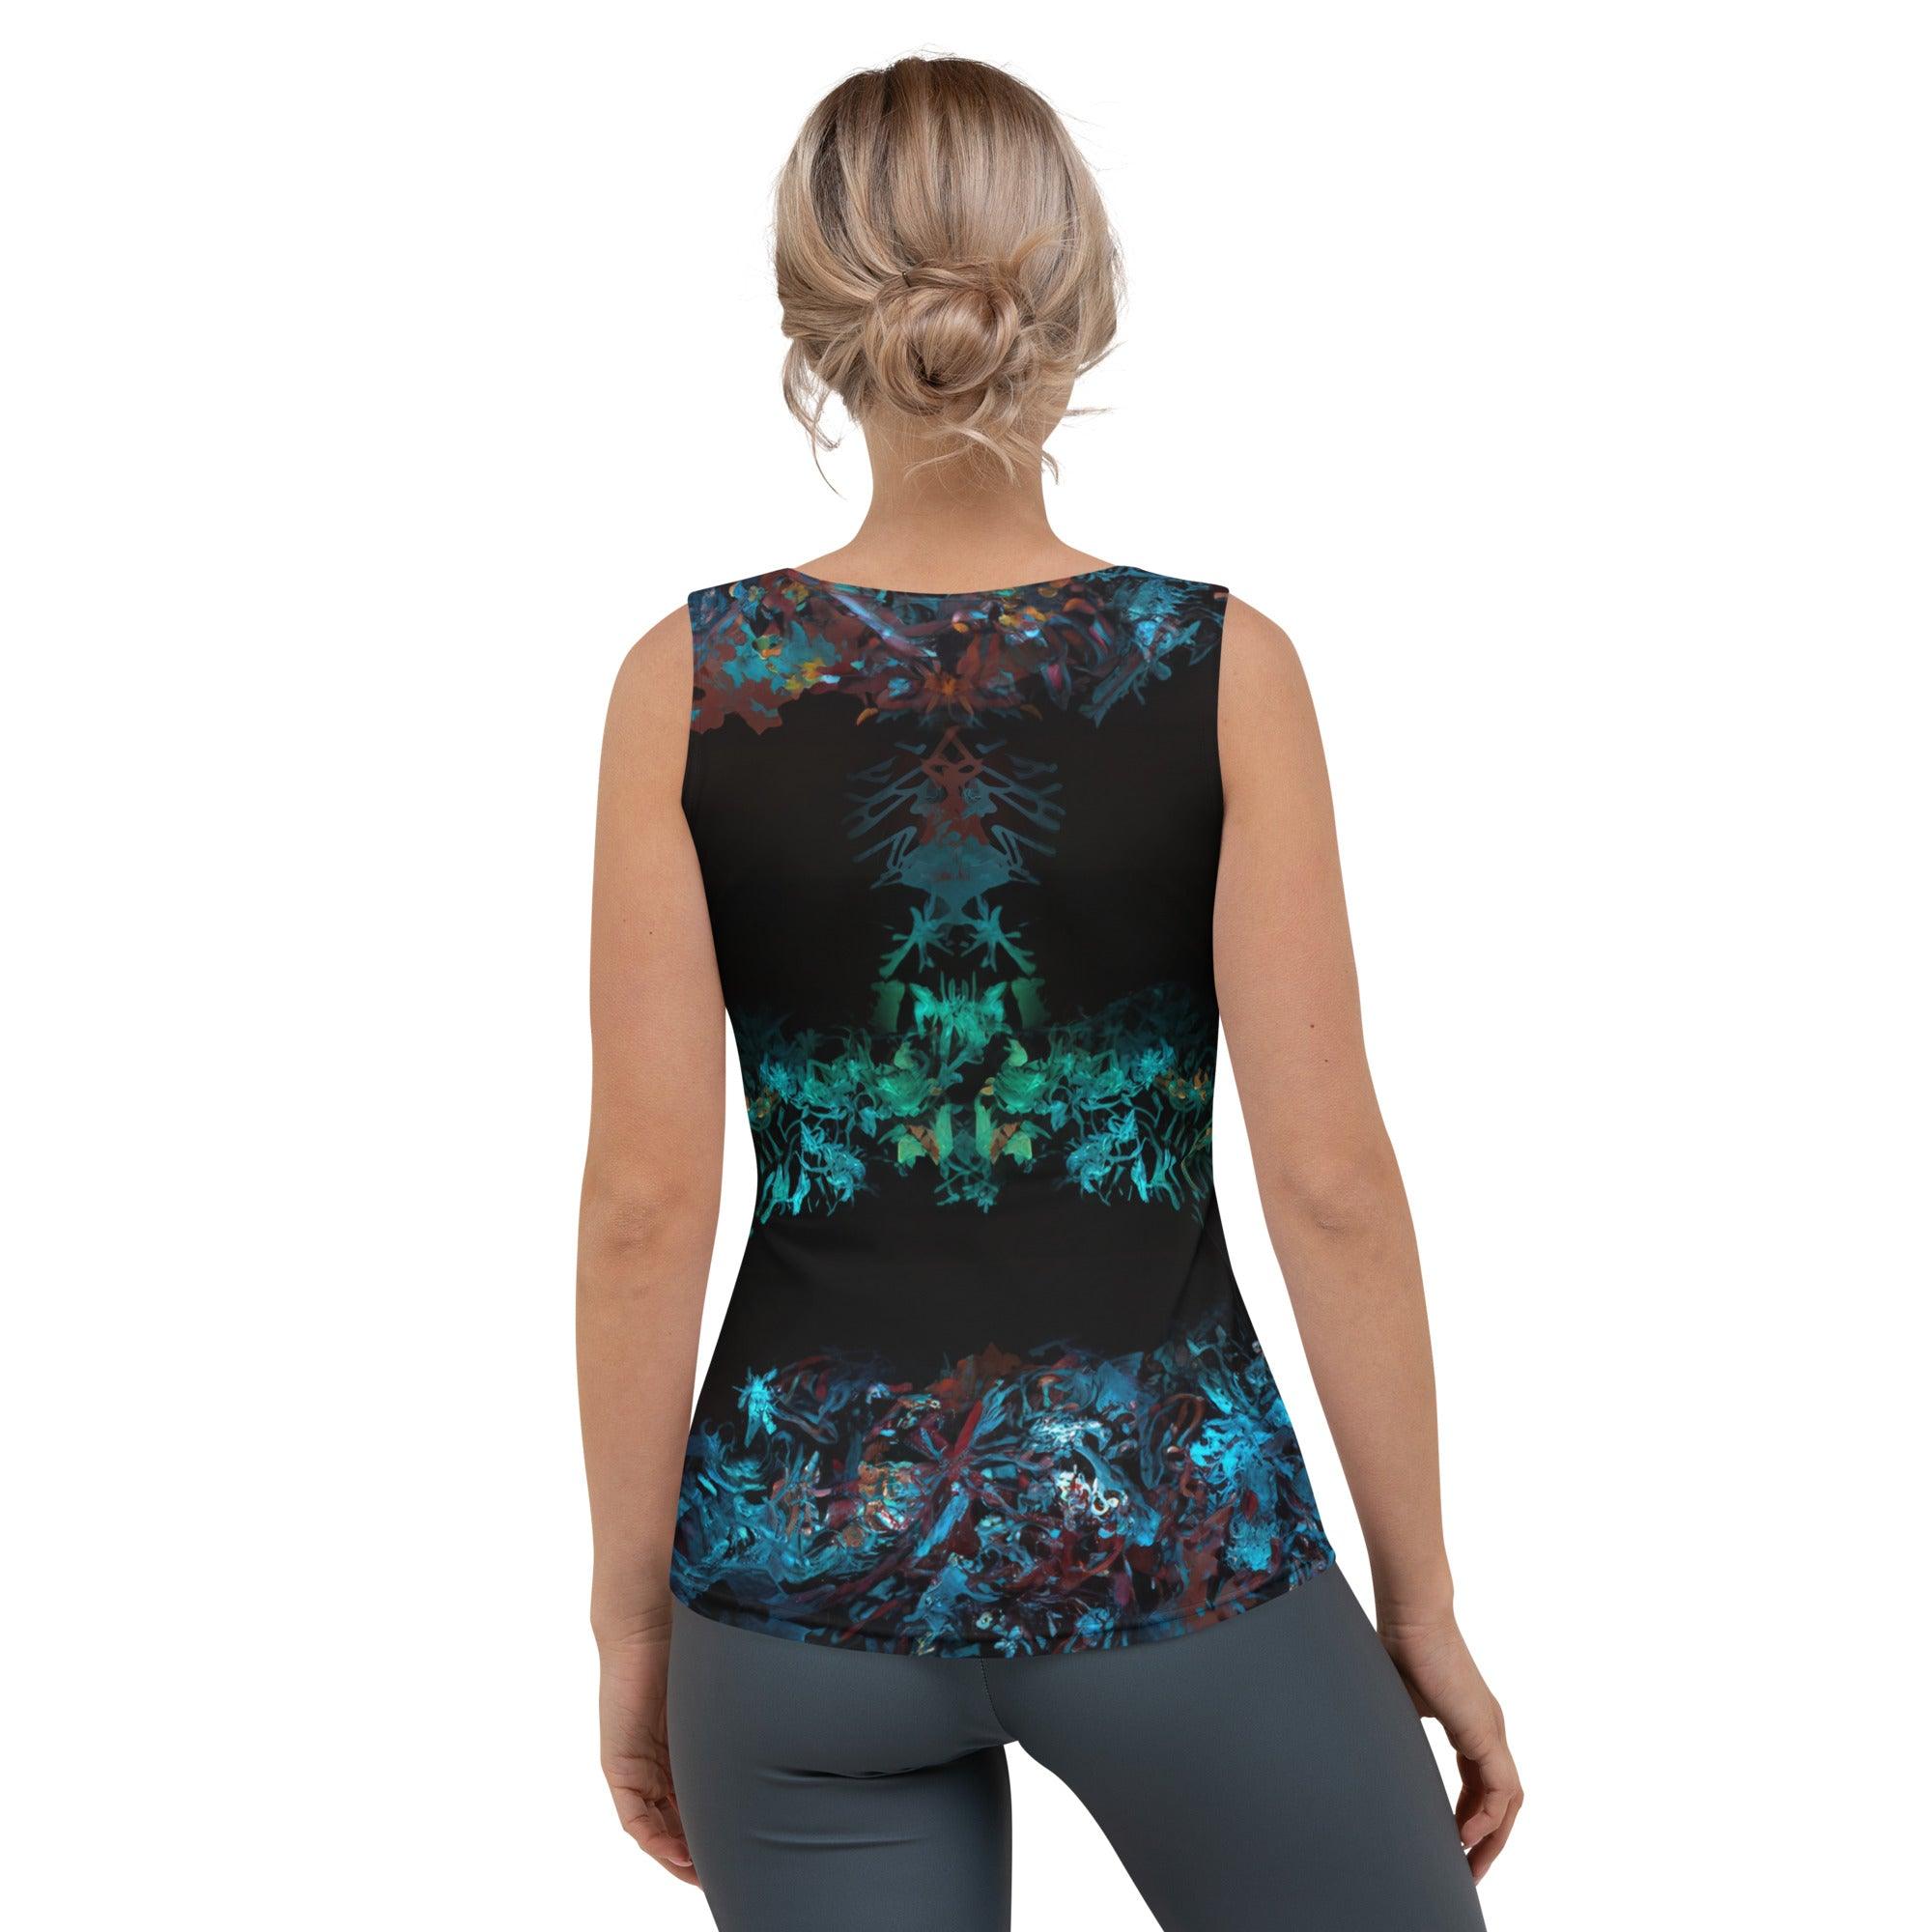 Artistic Harmony All-Over Print Women's Tank Top - Beyond T-shirts